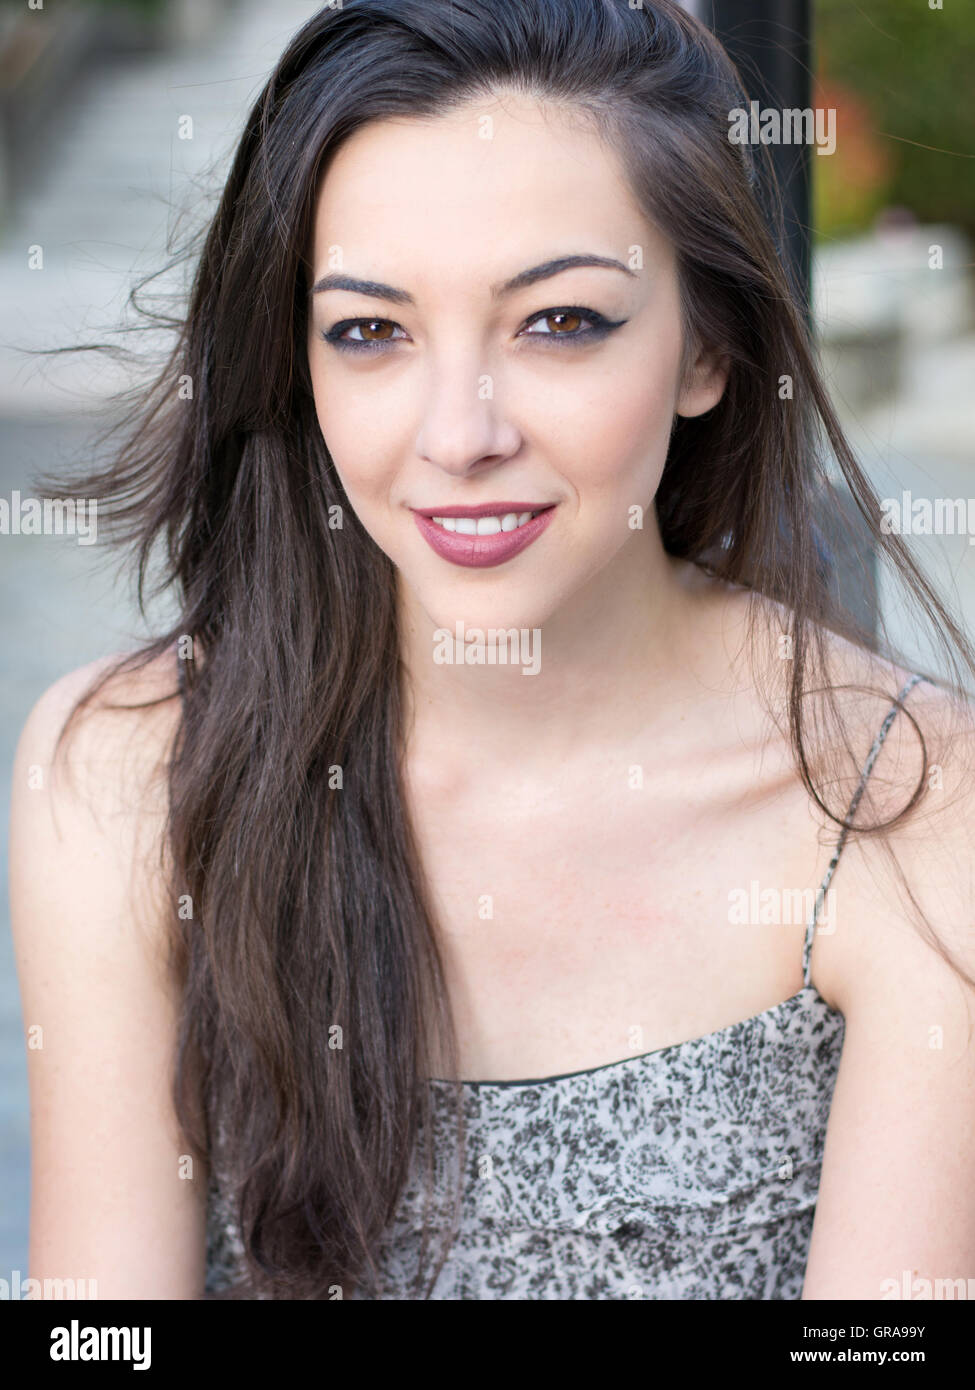 Close up Portrait of a fashionable young woman Stock Photo